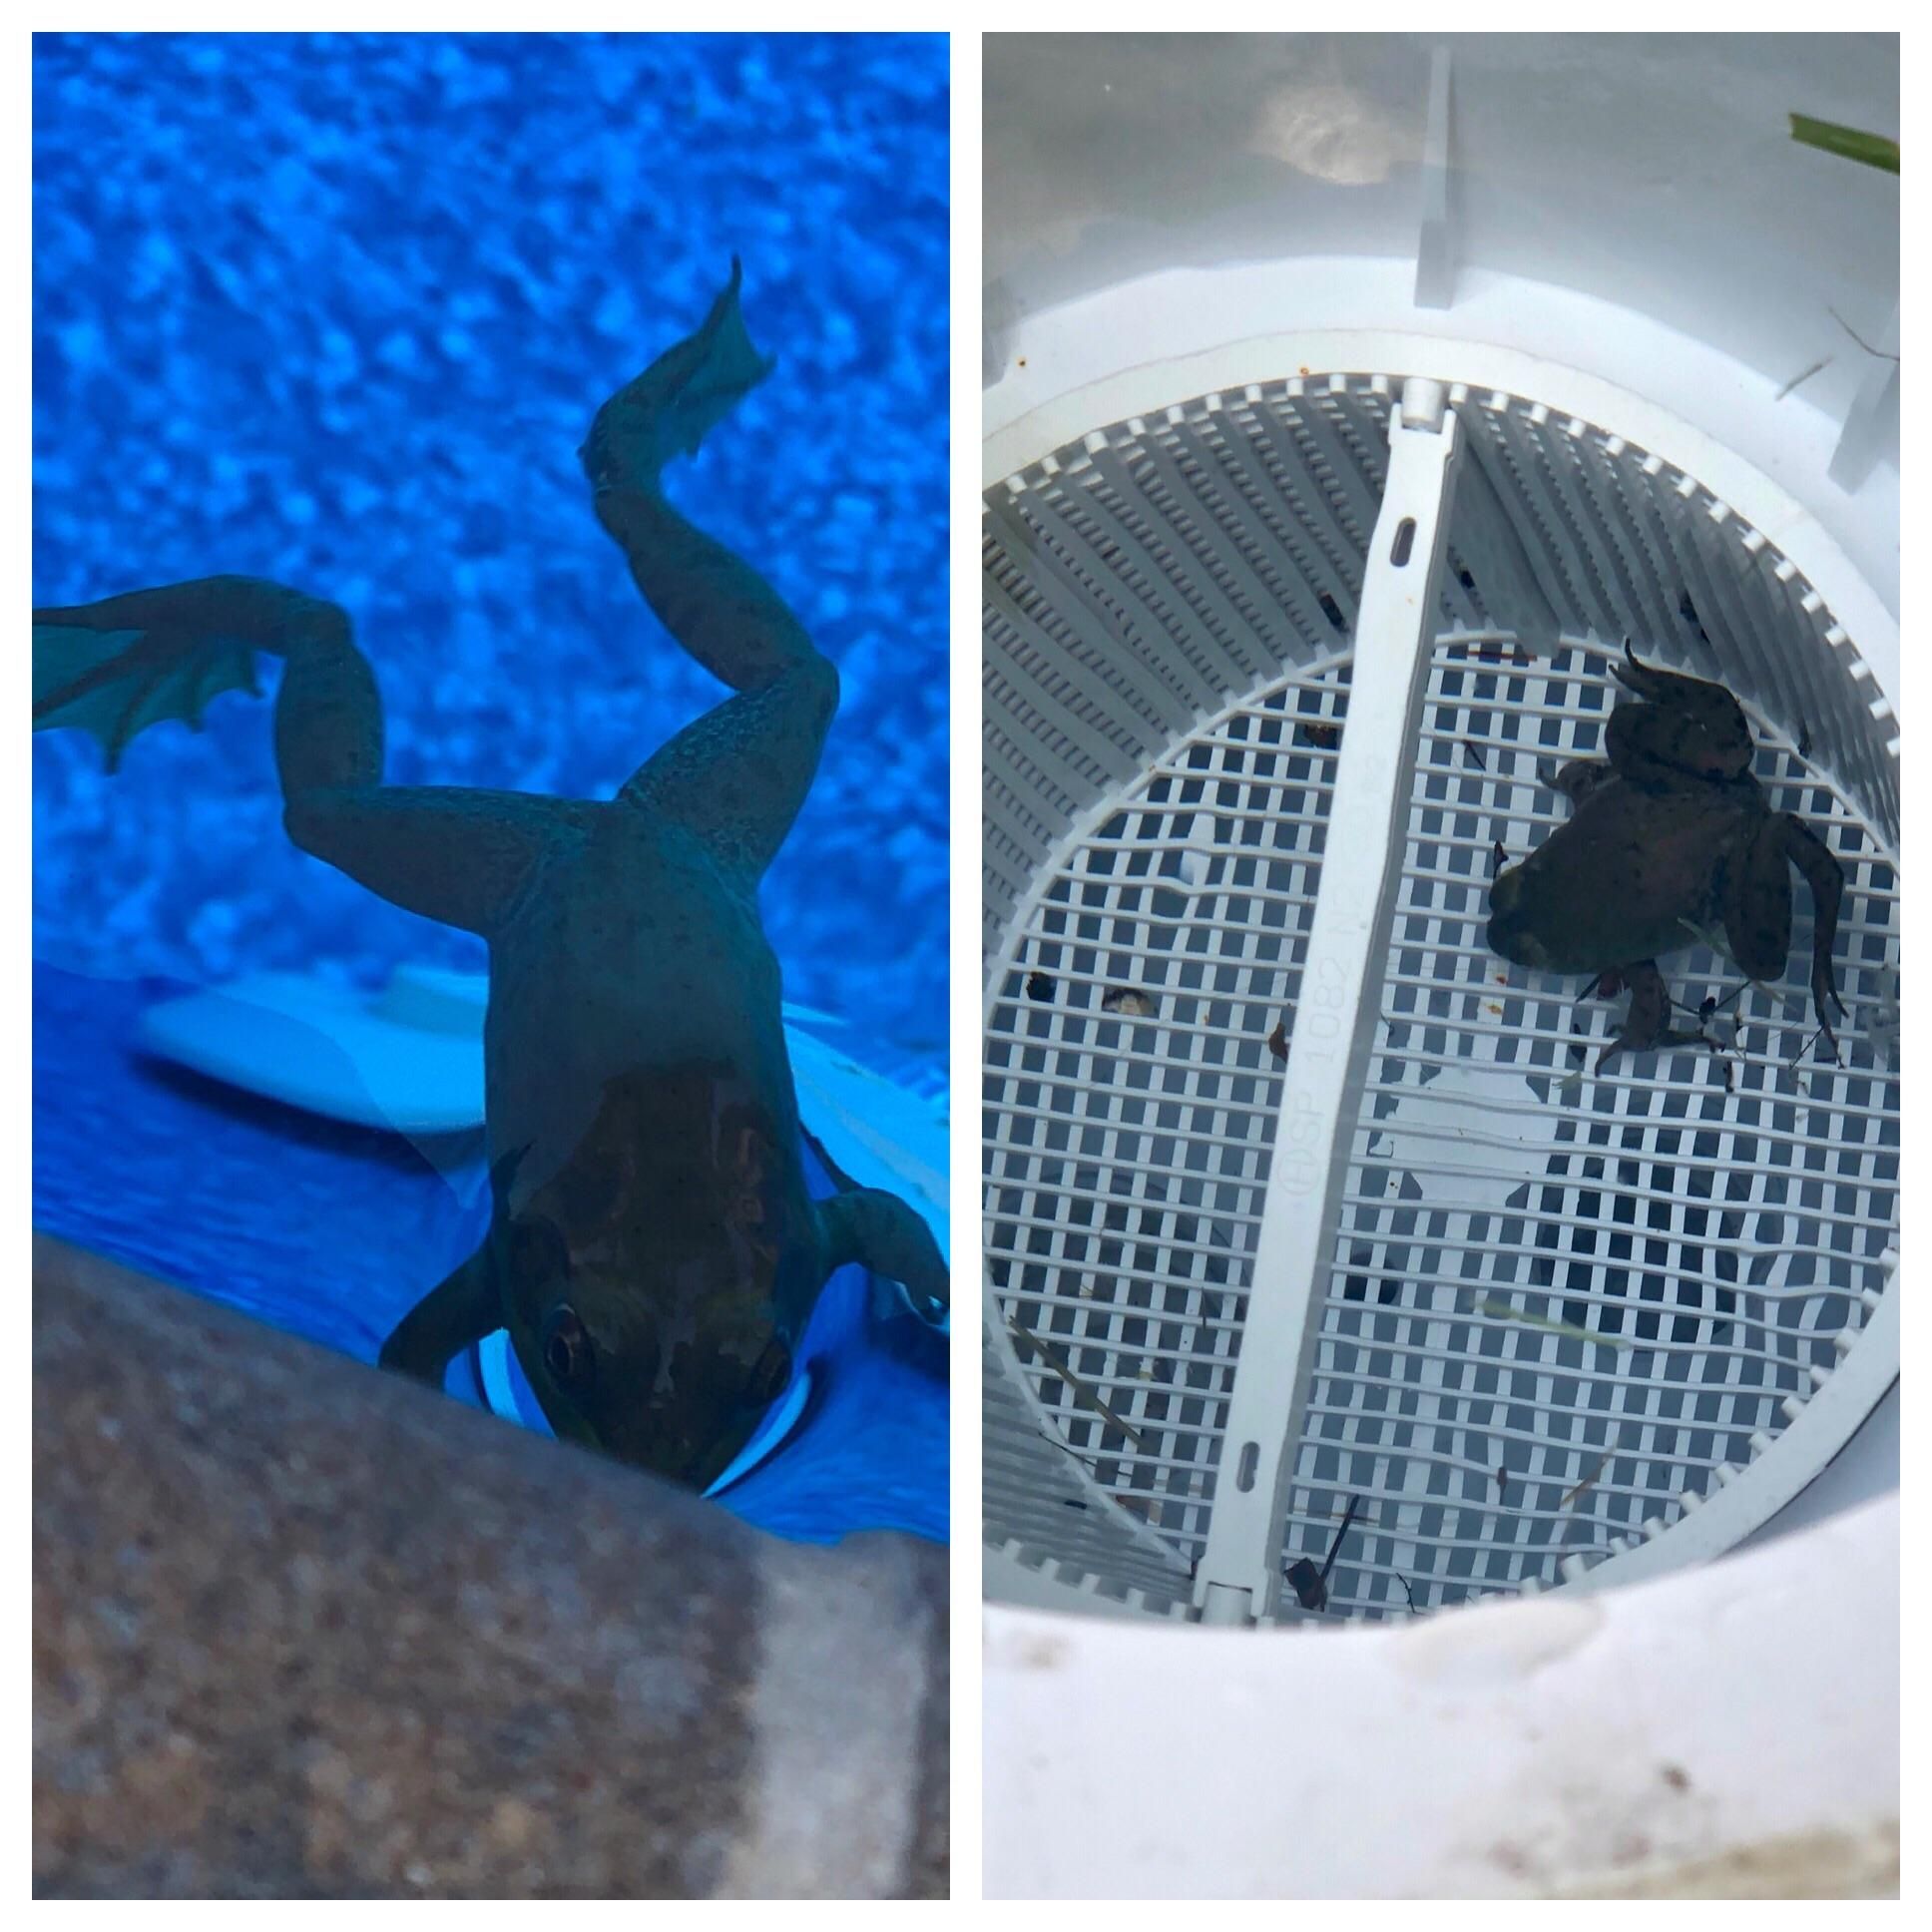 Everyday this little guy jumps into my pool, swims into the filter and eats all of the bugs that cycle through. He hasn’t had to work for his dinner in months.